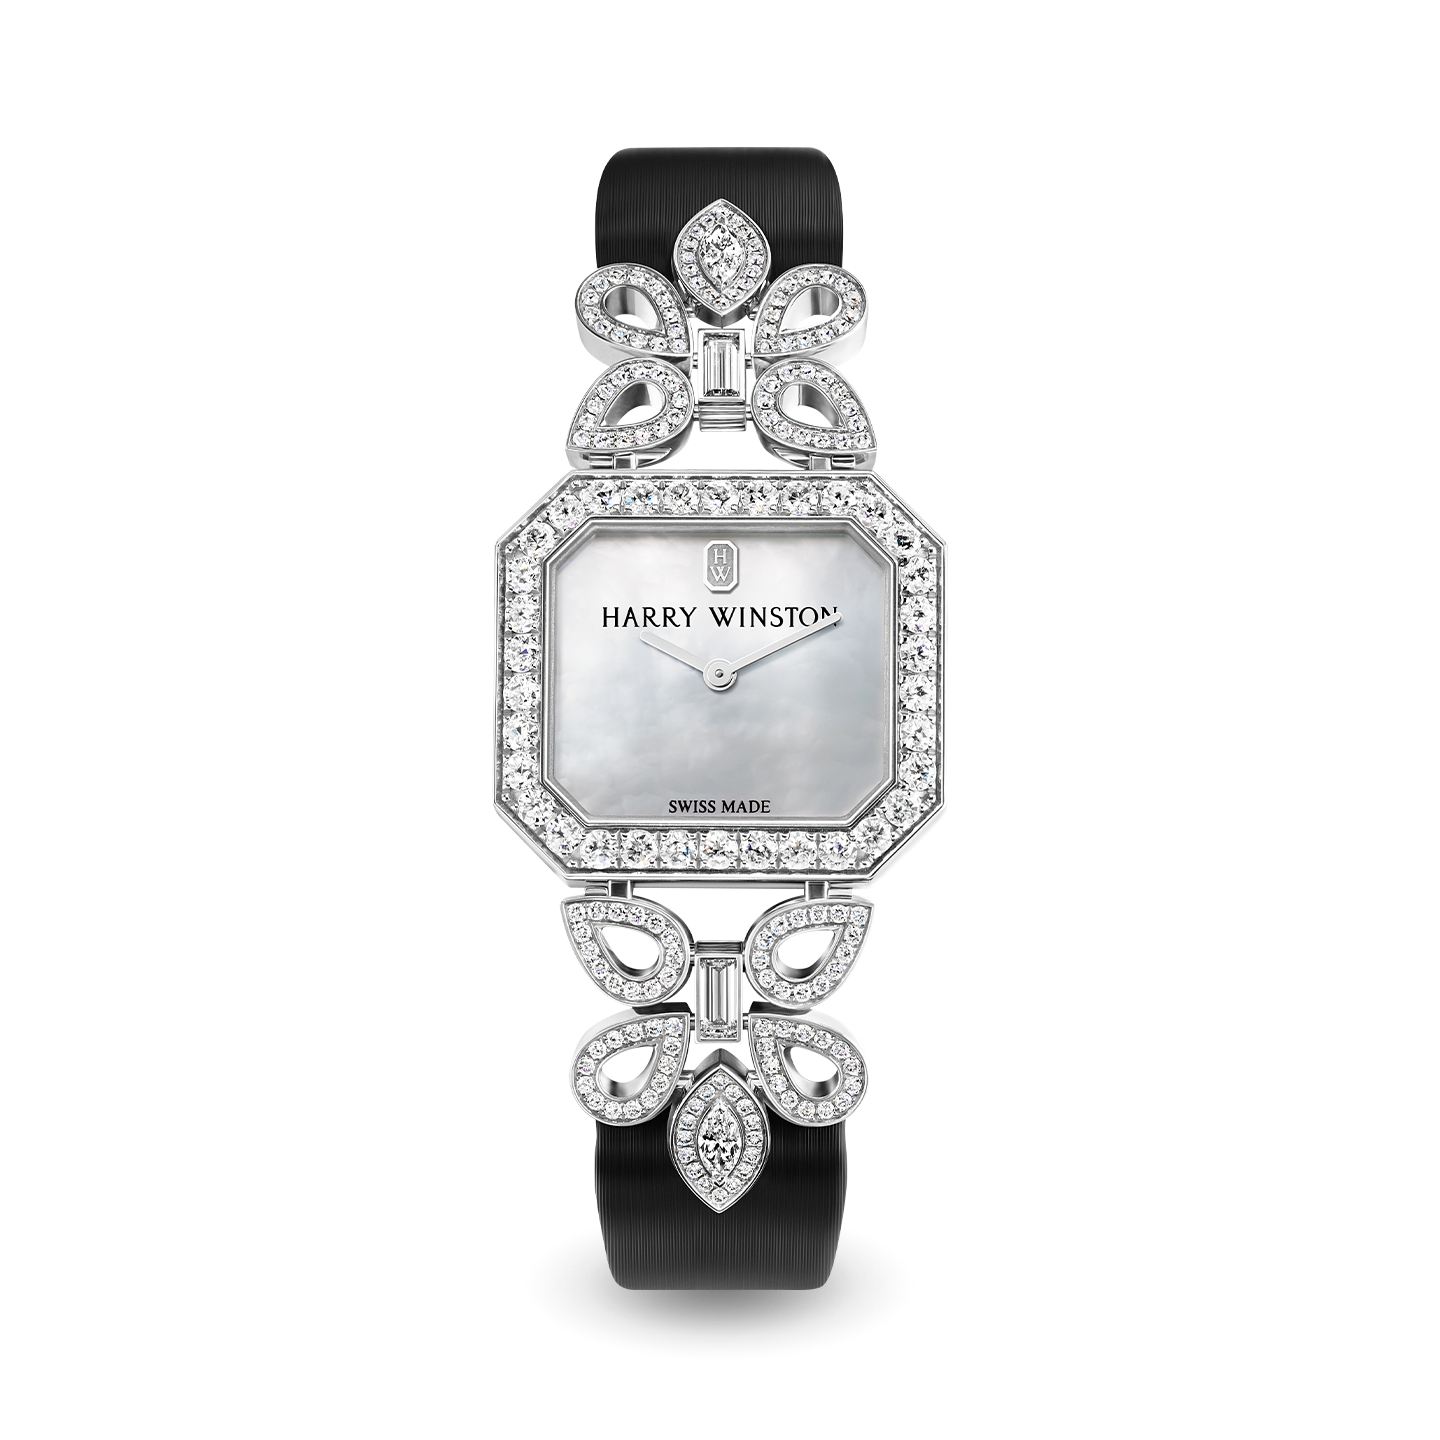 Sublime Timepiece by Harry Winston, product image 1